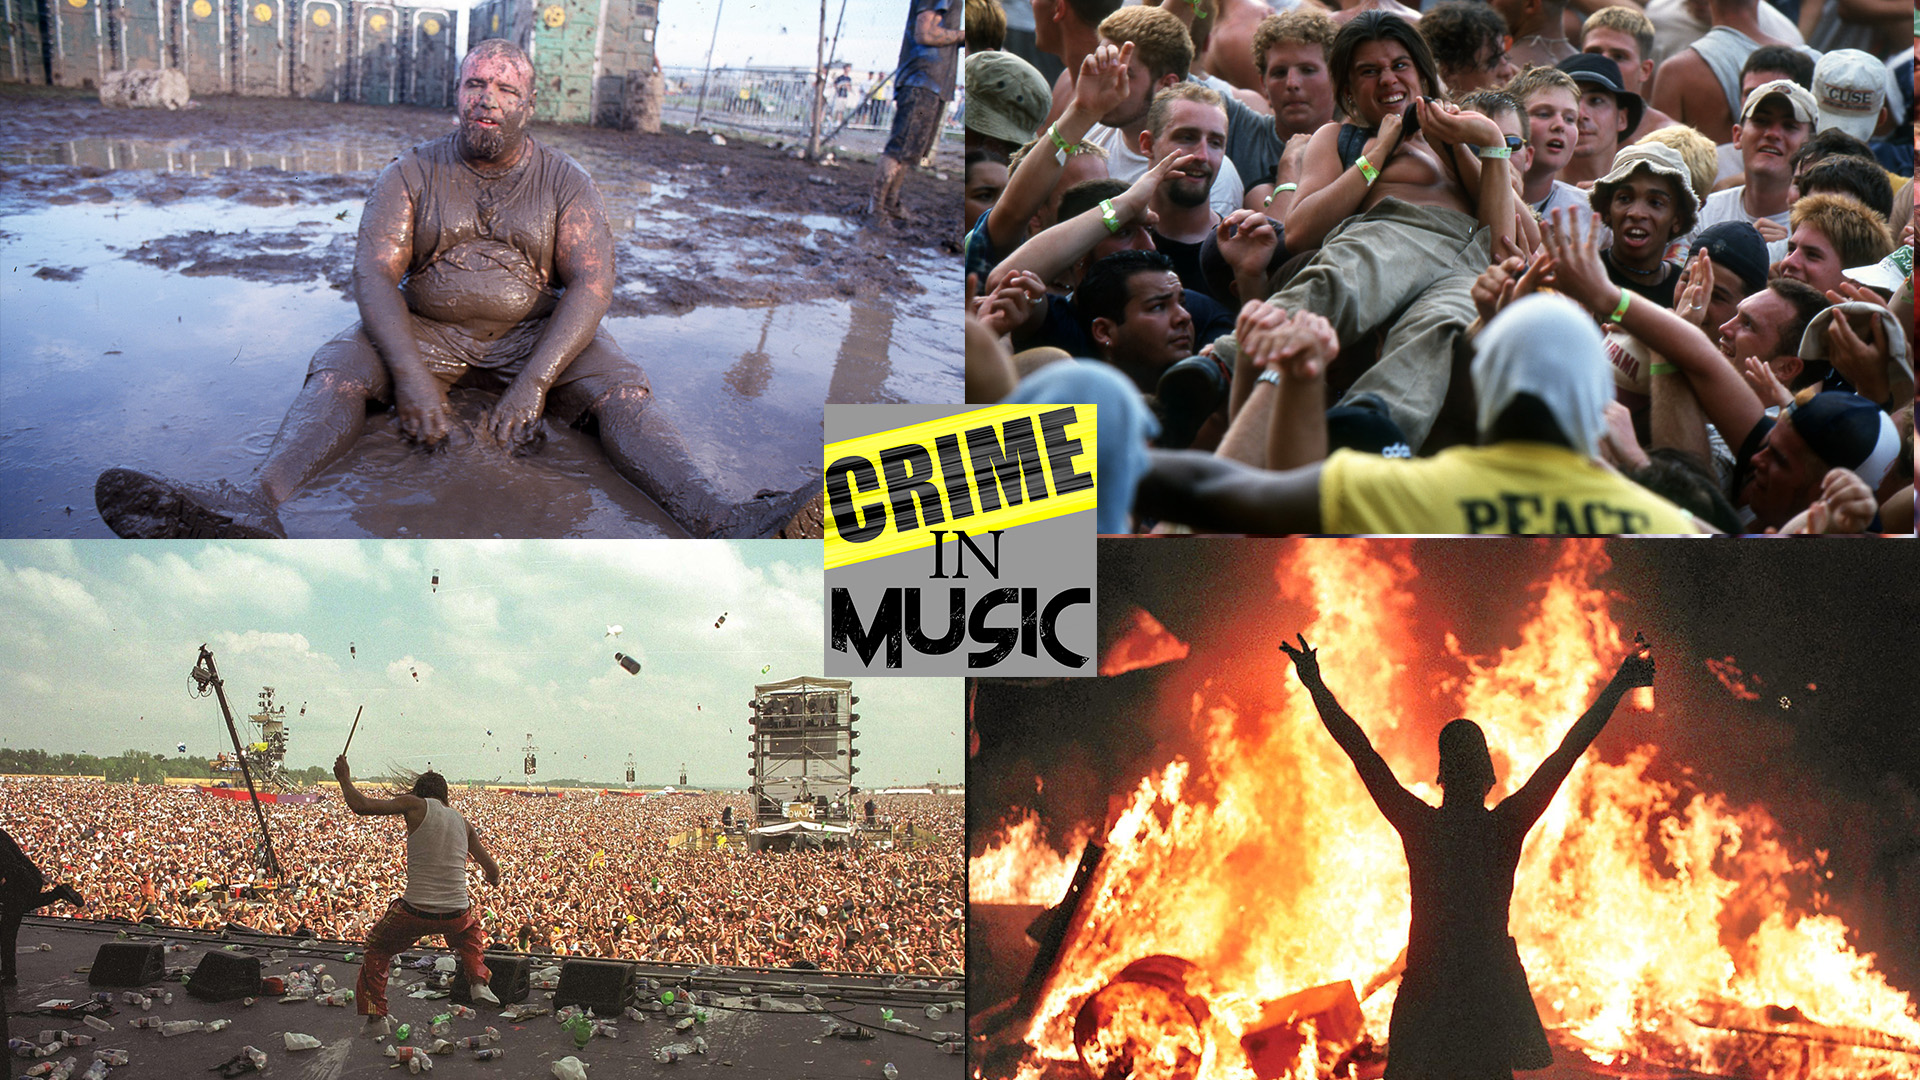 photo collage of various scenes from Woodstock 1999 festival